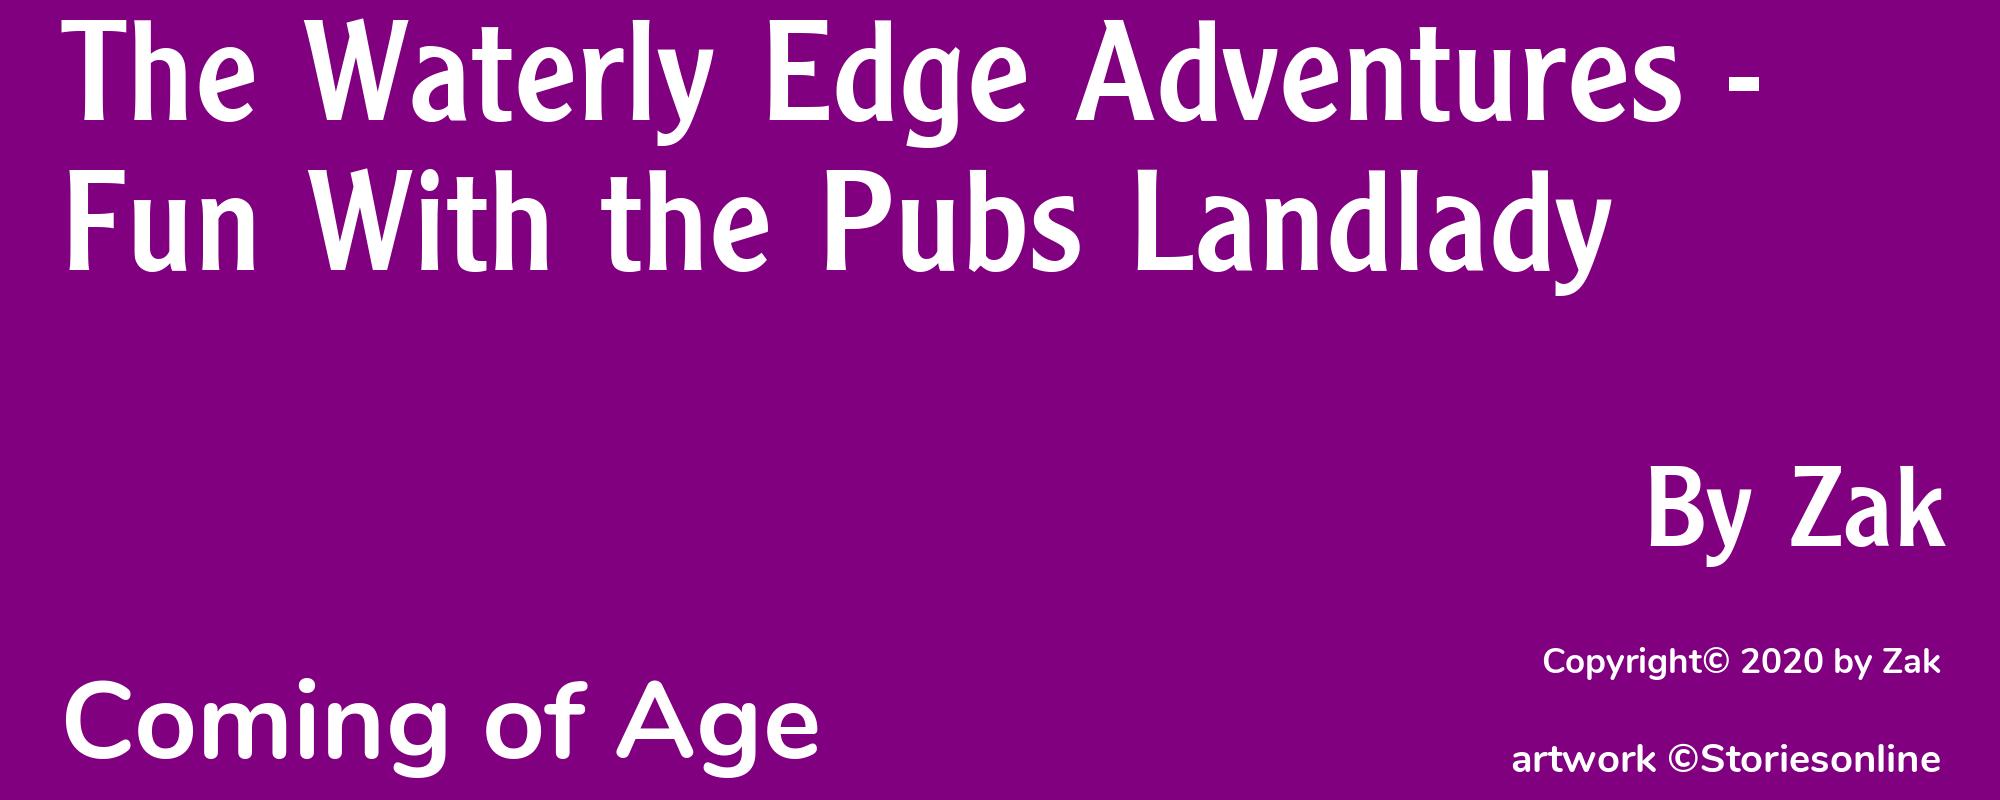 The Waterly Edge Adventures - Fun With the Pubs Landlady - Cover